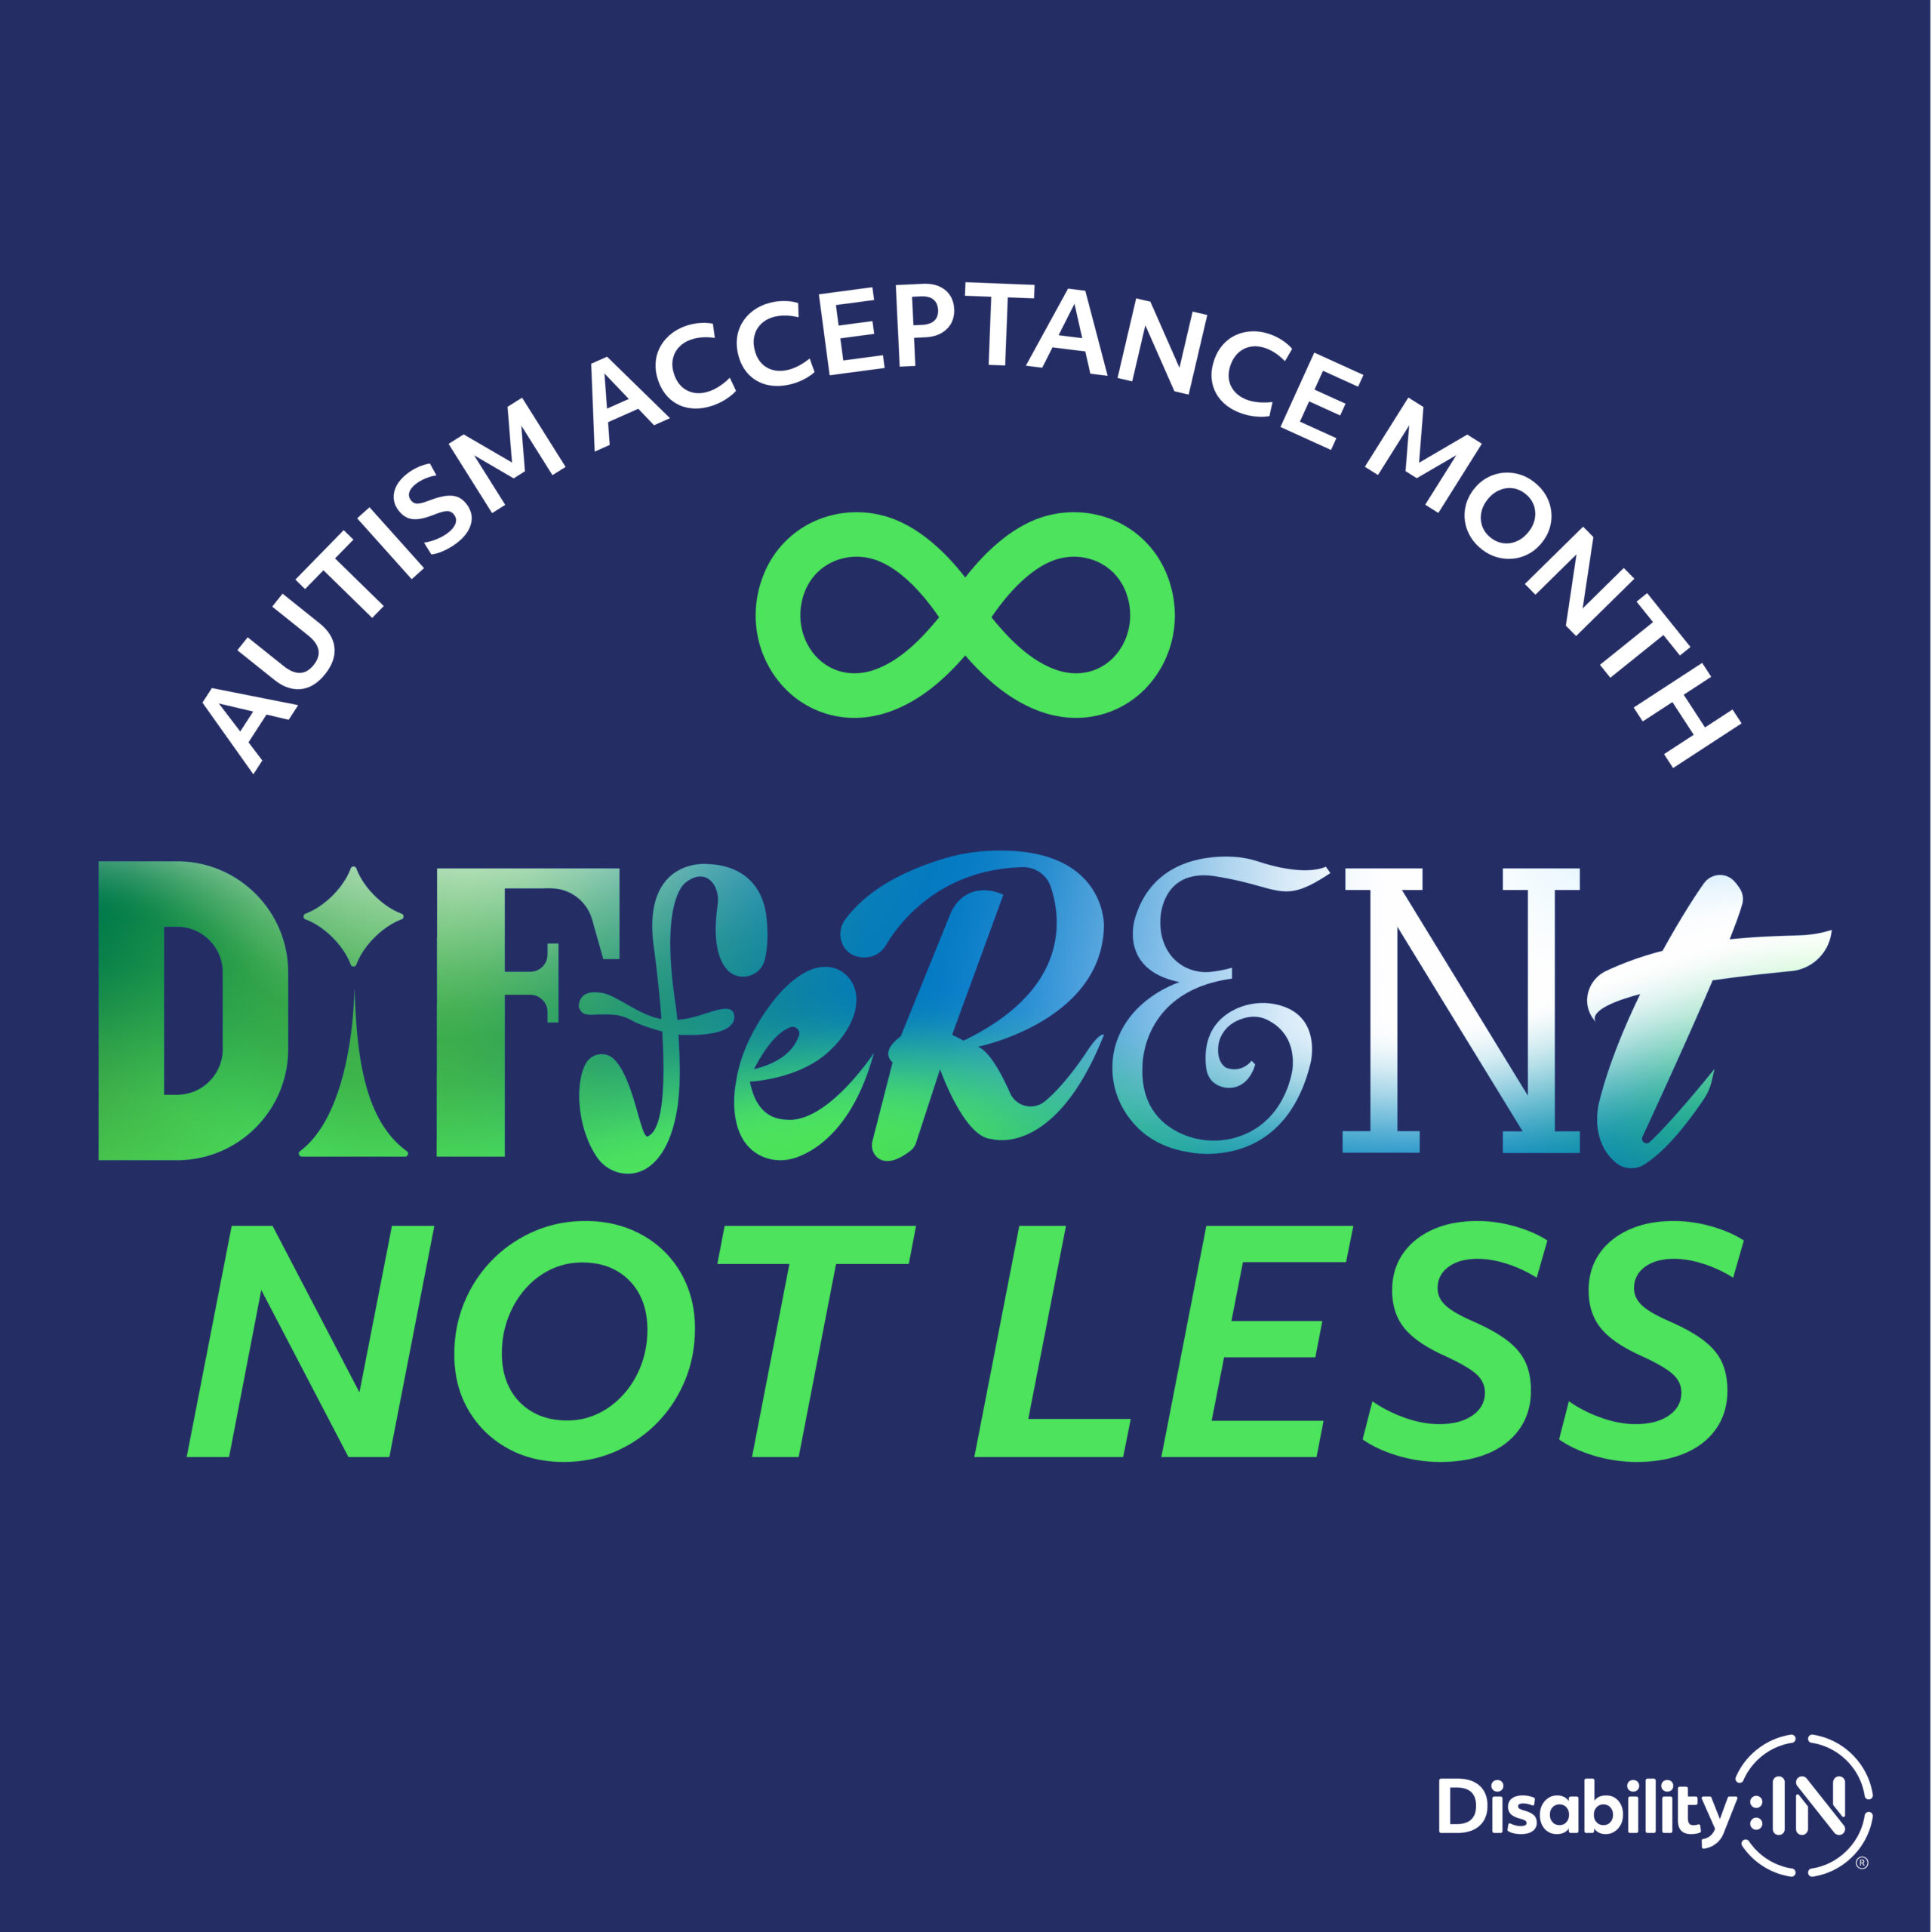 Dark blue background behind white arched text, Autism Acceptance Month, above a green infinity symbol. Below the green infinity symbol is the word, Different, that has different typographic styles for each letter with a green-blue-white gradient. Below is green text, Not Less. On the bottom right is a white Disability:IN logo.